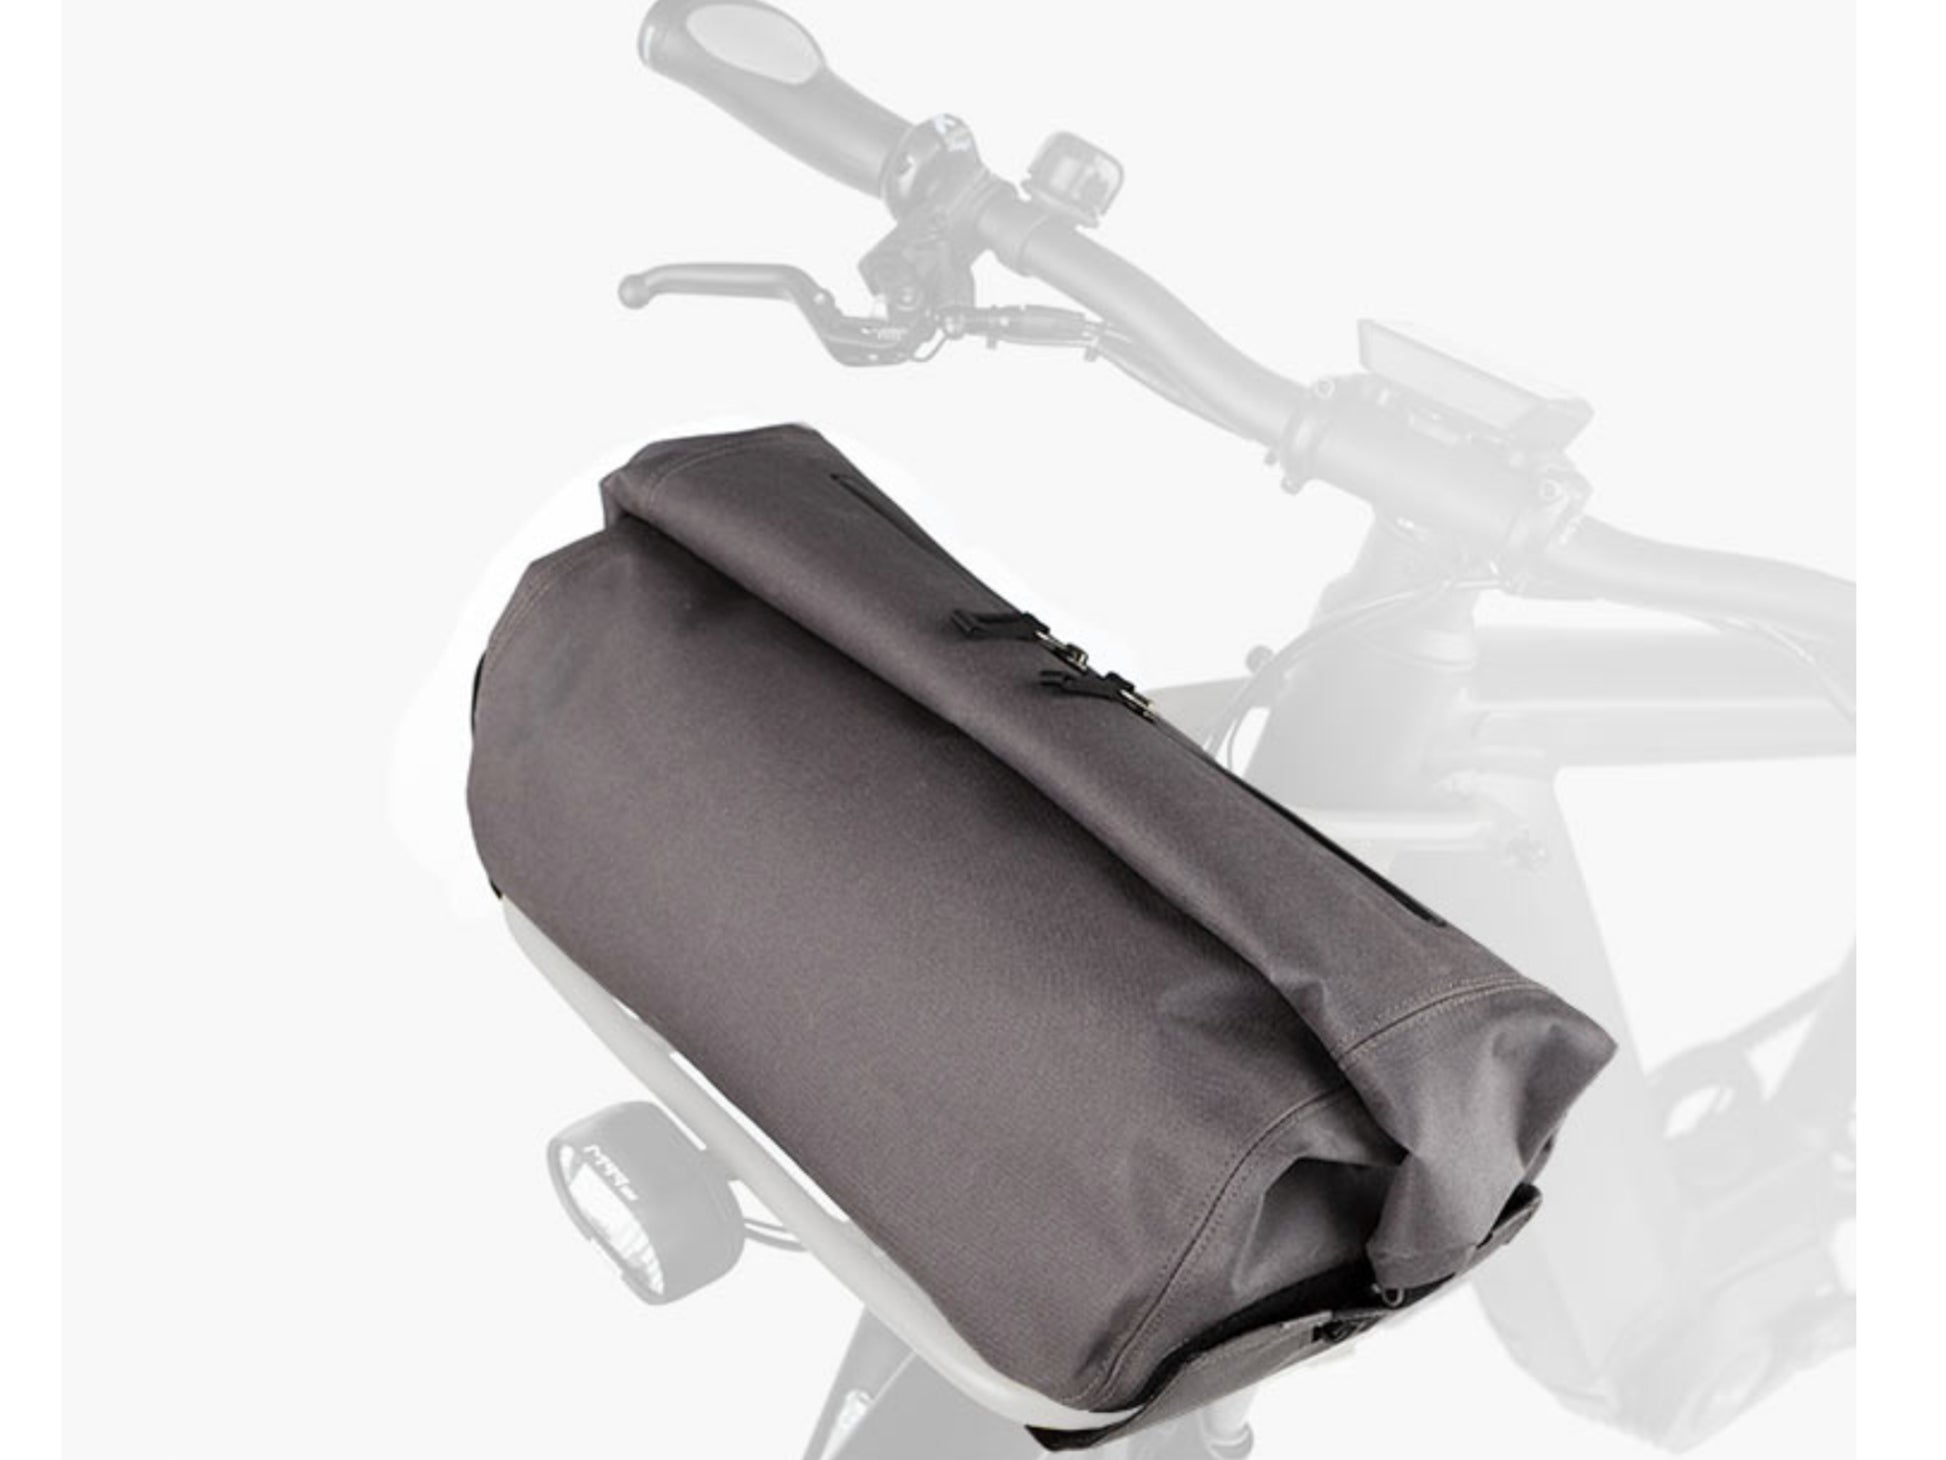 Riese and Muller Supercharger GT Touring HS emtb hardtail close up front carrier bag option